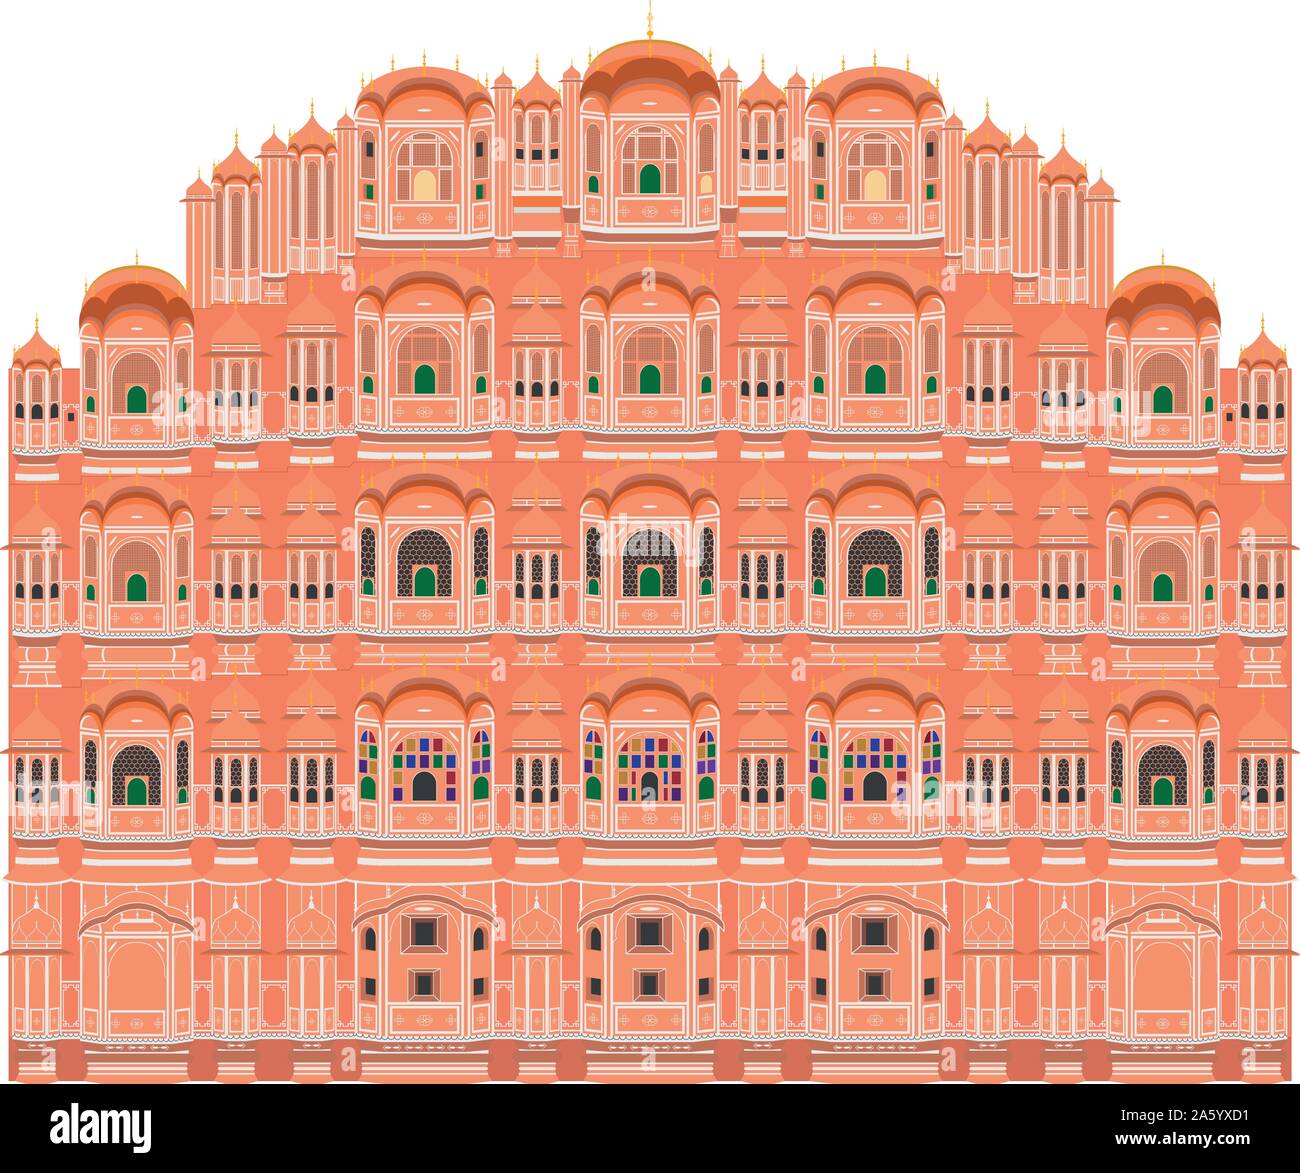 Hawa mahal Cut Out Stock Images & Pictures - Alamy